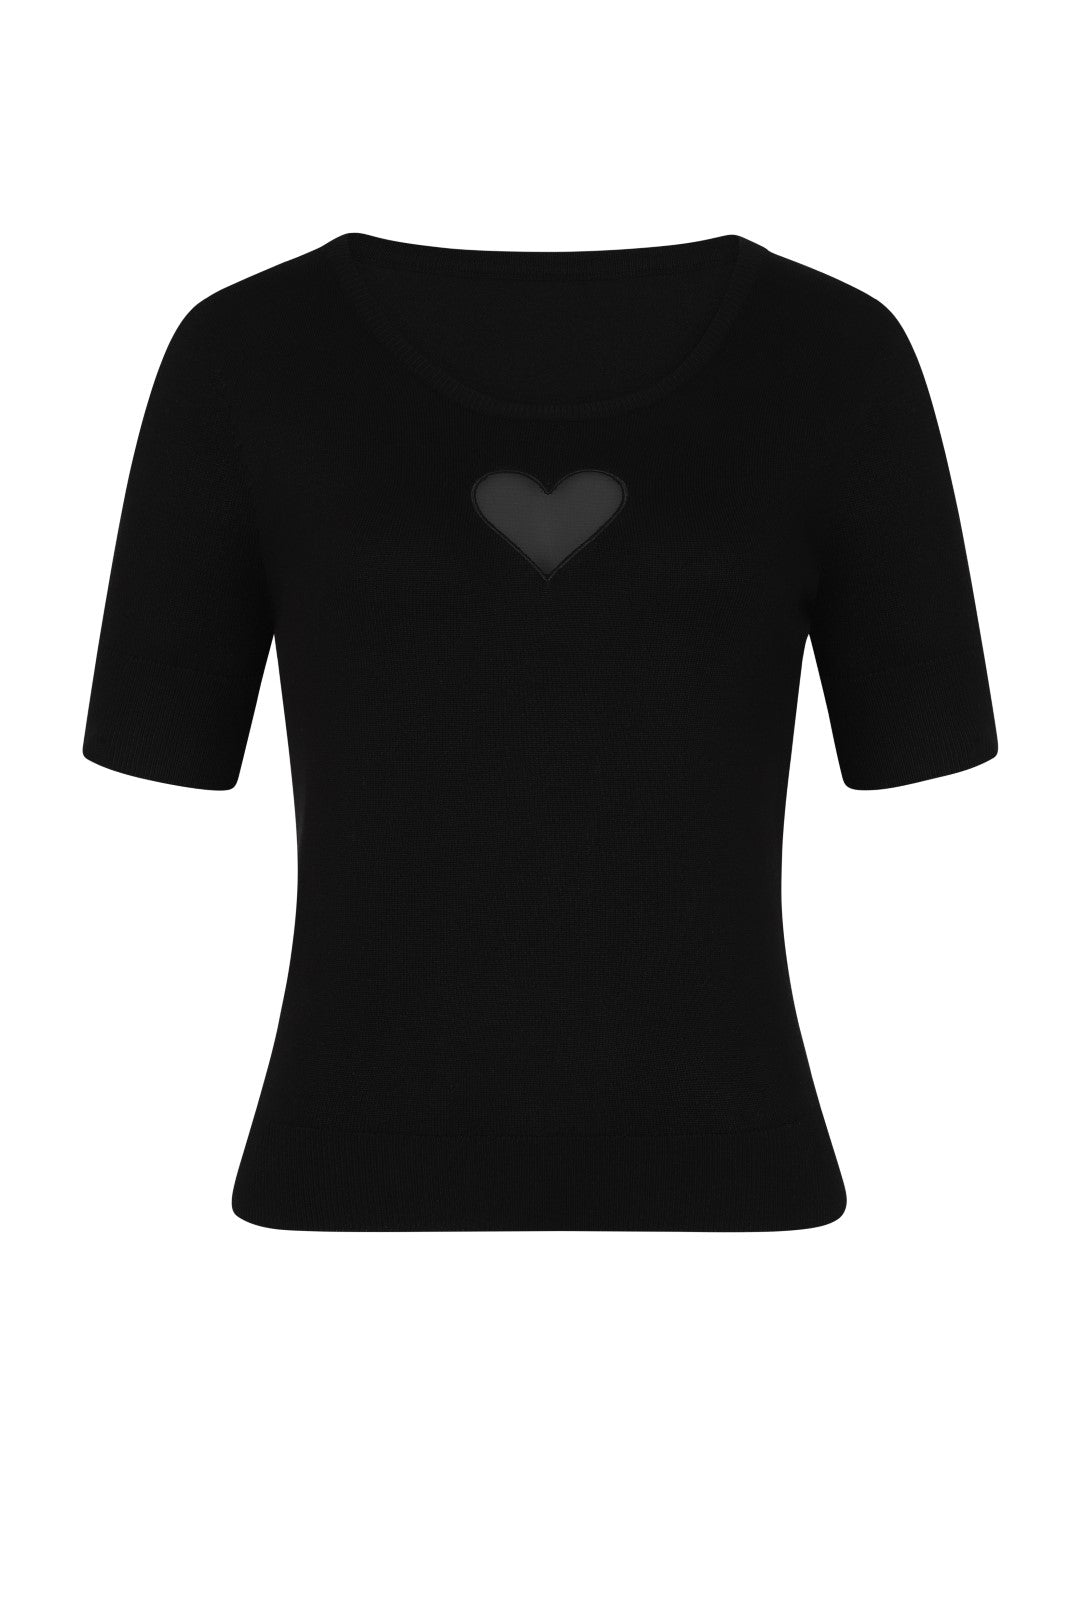 Heart Top by Hell Bunny